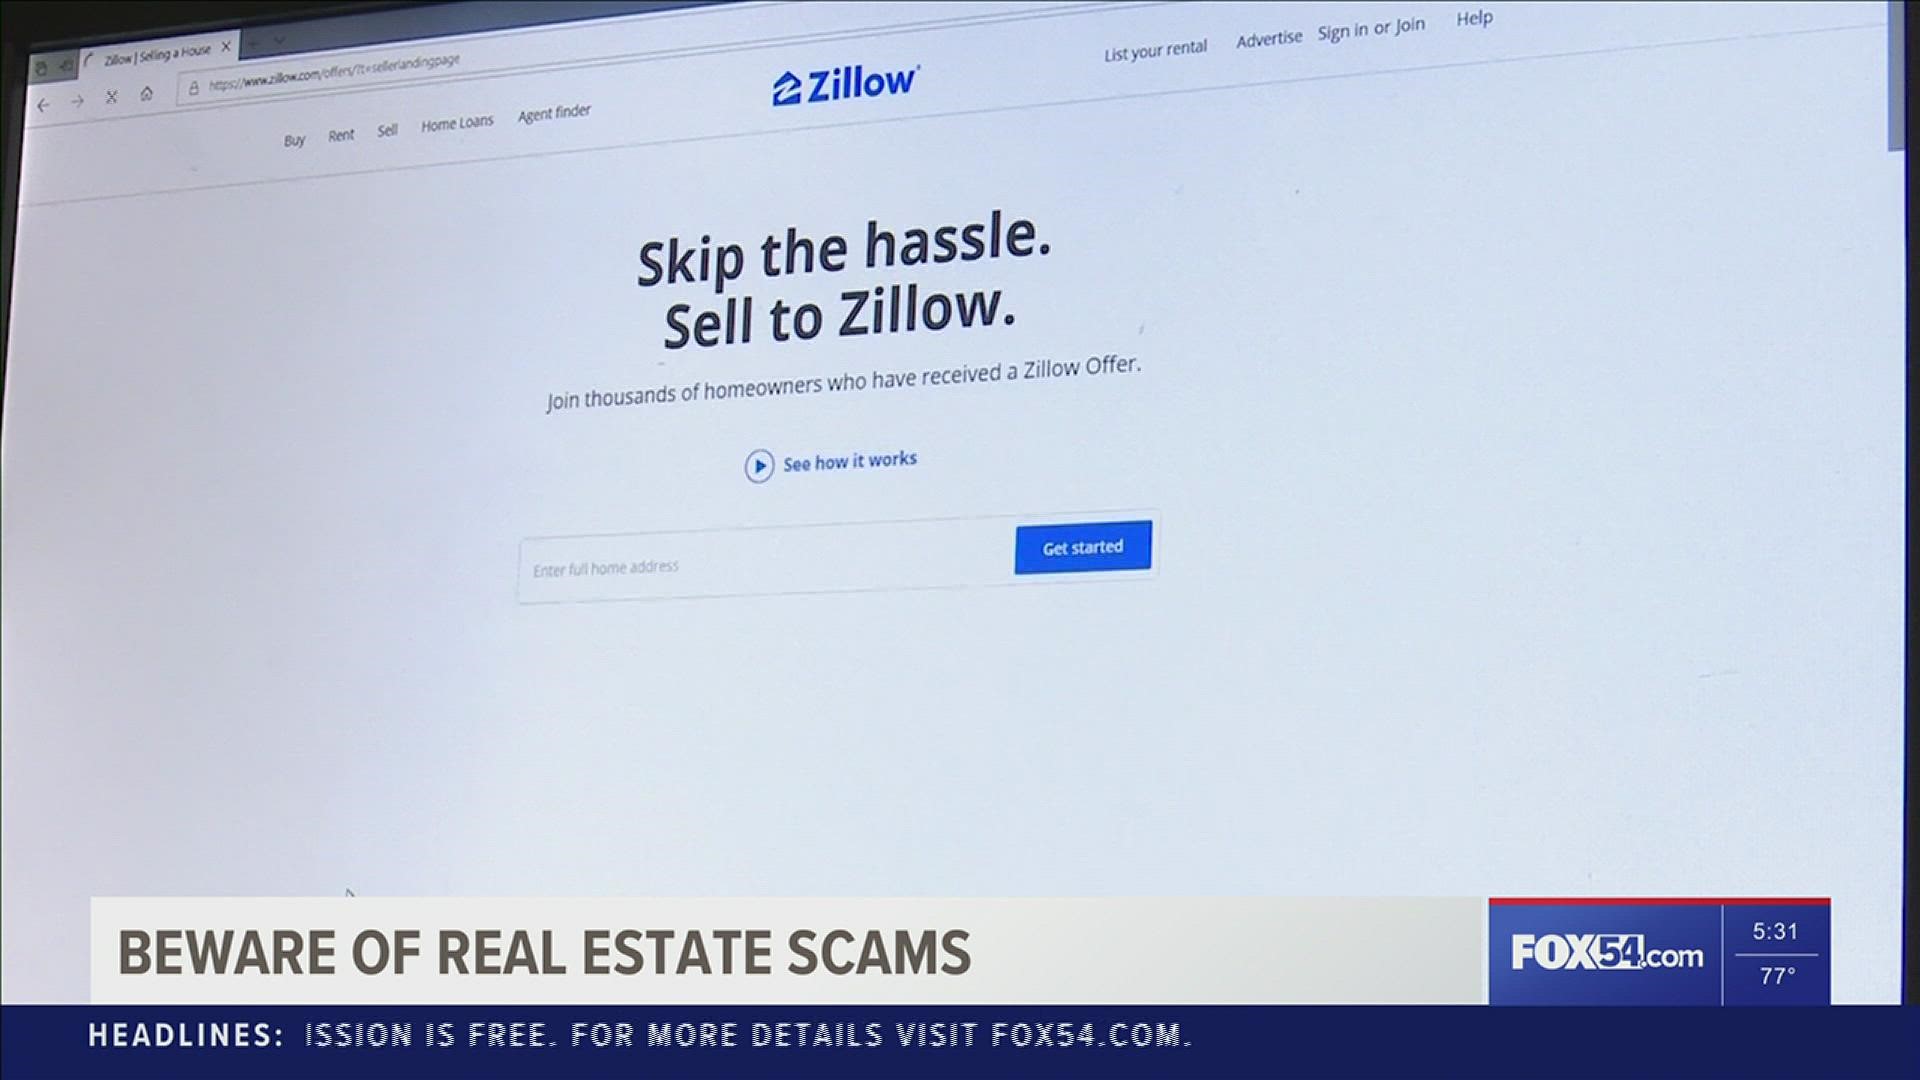 Real estate scams have been happening across the country and Madison is the latest city to fall victim.